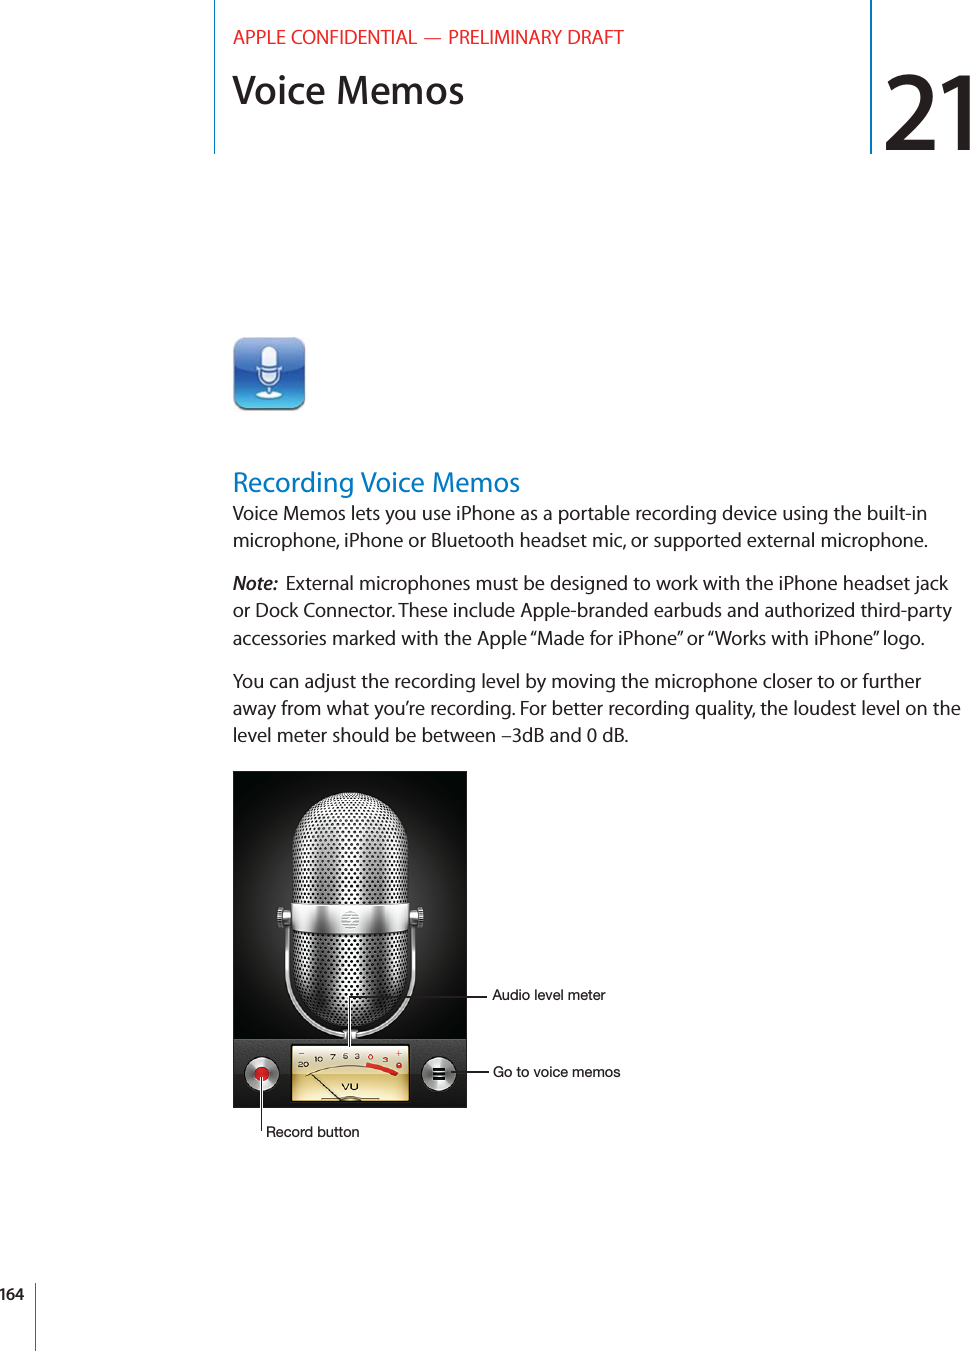 Voice Memos 21APPLE CONFIDENTIAL — PRELIMINARY DRAFTRecording Voice MemosVoice Memos lets you use iPhone as a portable recording device using the built-in microphone, iPhone or Bluetooth headset mic, or supported external microphone.Note:  External microphones must be designed to work with the iPhone headset jack or Dock Connector. These include Apple-branded earbuds and authorized third-party accessories marked with the Apple “Made for iPhone” or “Works with iPhone” logo.You can adjust the recording level by moving the microphone closer to or further away from what you’re recording. For better recording quality, the loudest level on the level meter should be between –3dB and 0 dB.(*-,,(&apos;-&quot;(%.%&amp;,*(,(.(&quot;&amp;&amp;(+164